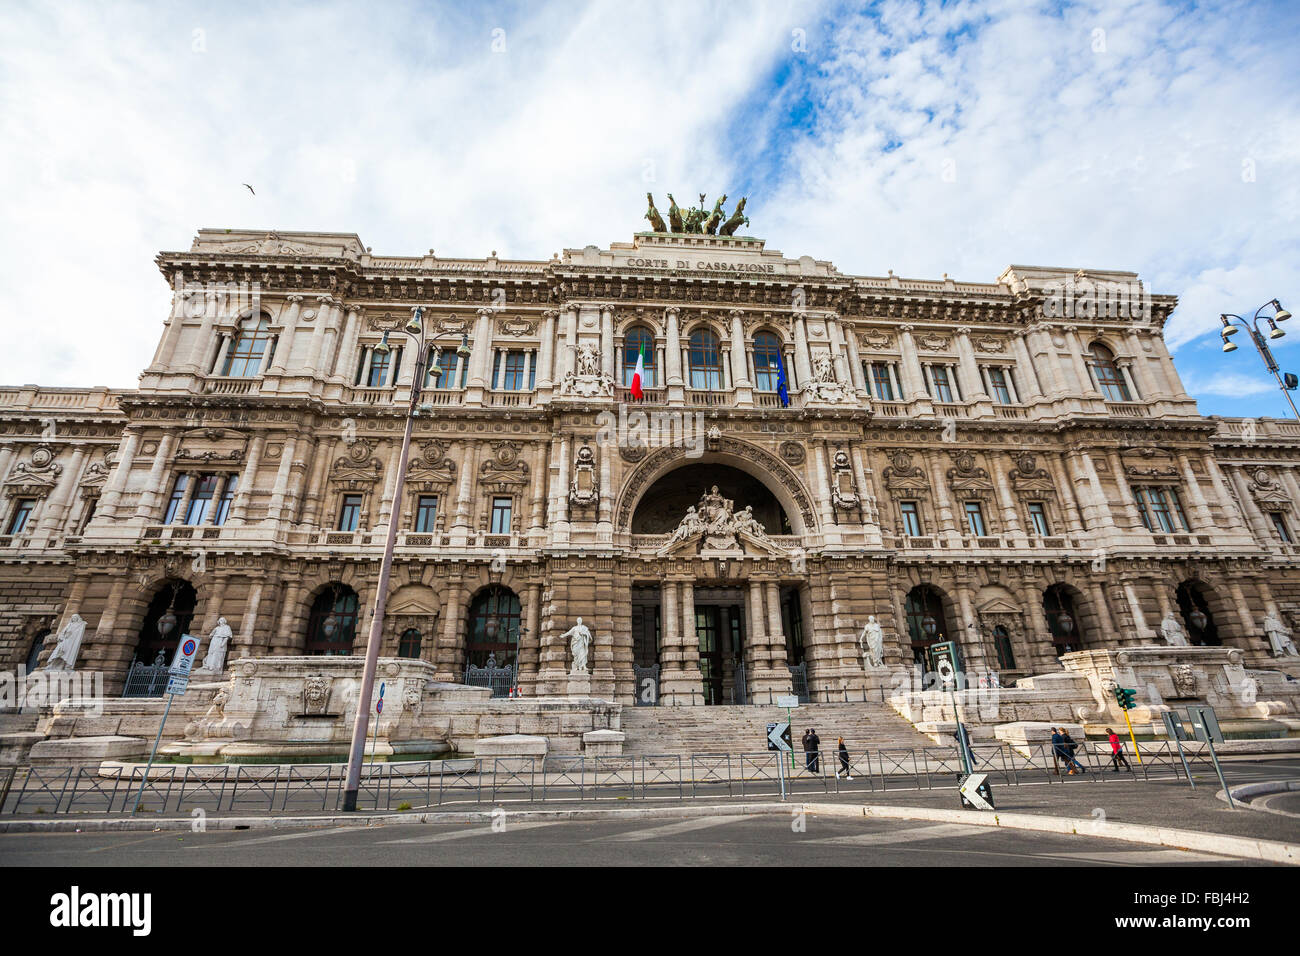 Tourism and sightseeing, general view over building facade of Palace of Justice, Supreme Court of Cassation, Rome, Italy Stock Photo